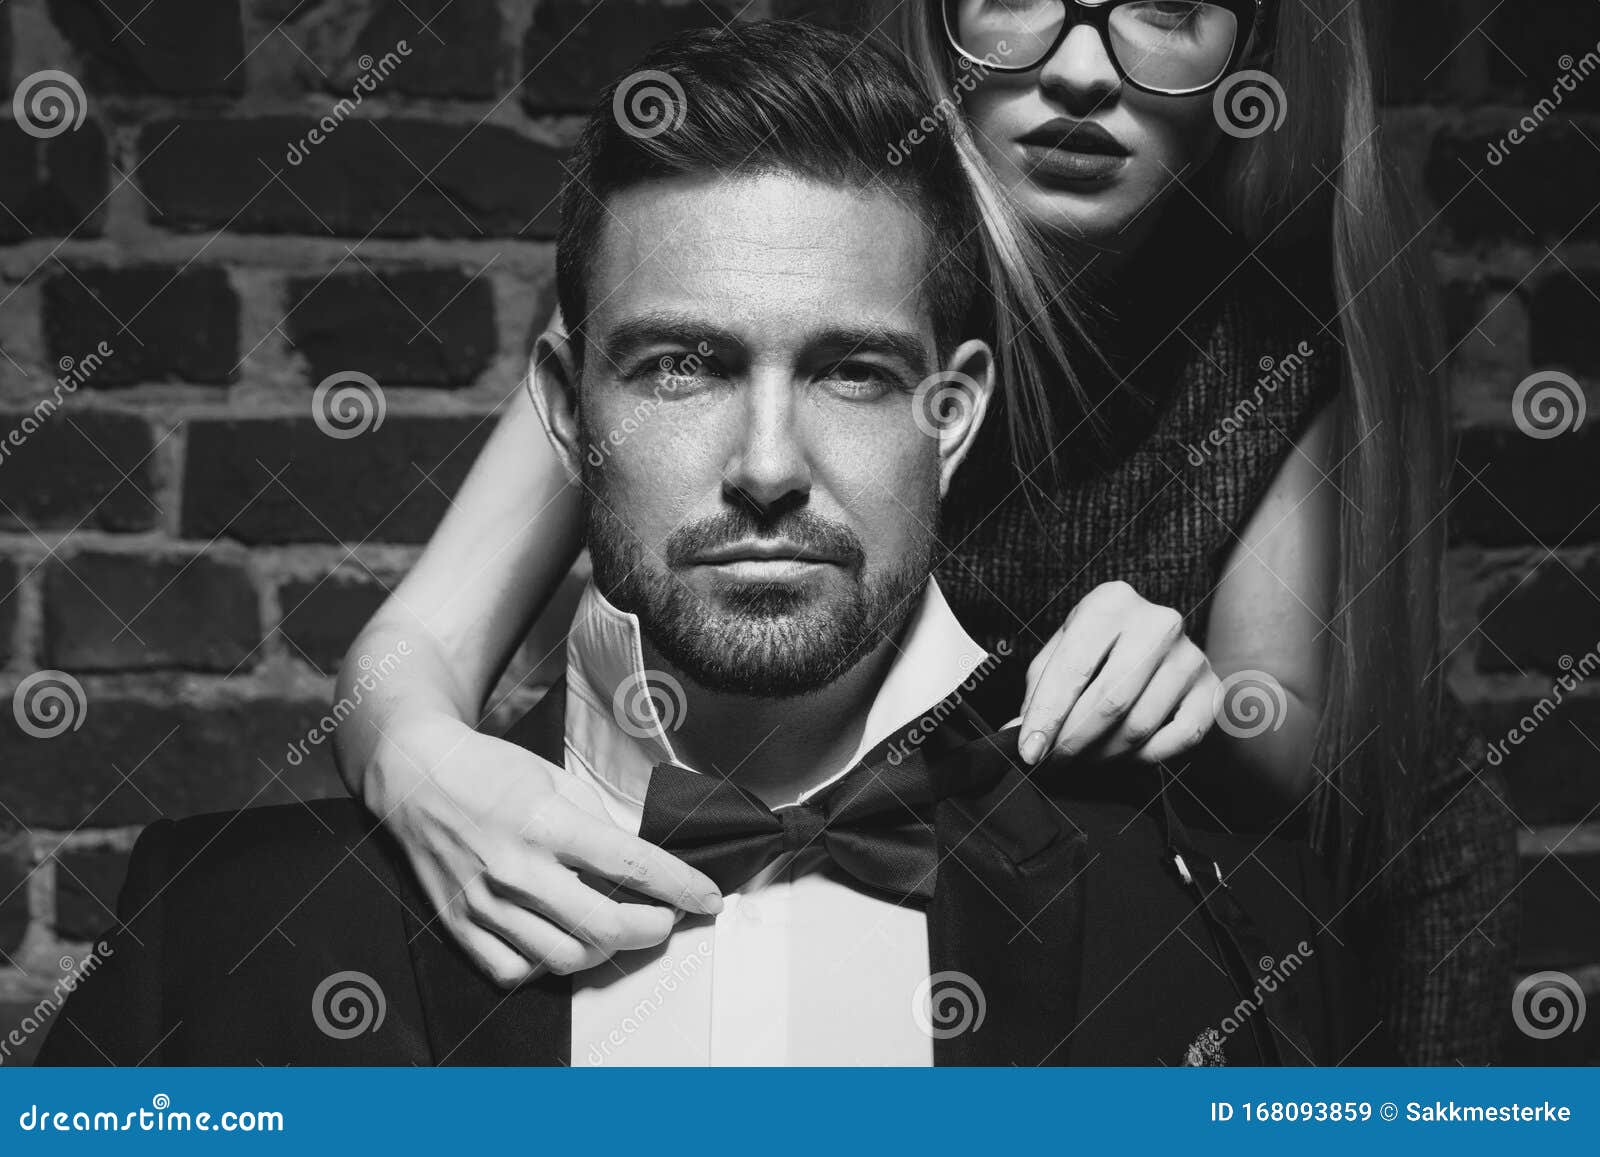 woman tie bow for sexy man in tuxedo black and white